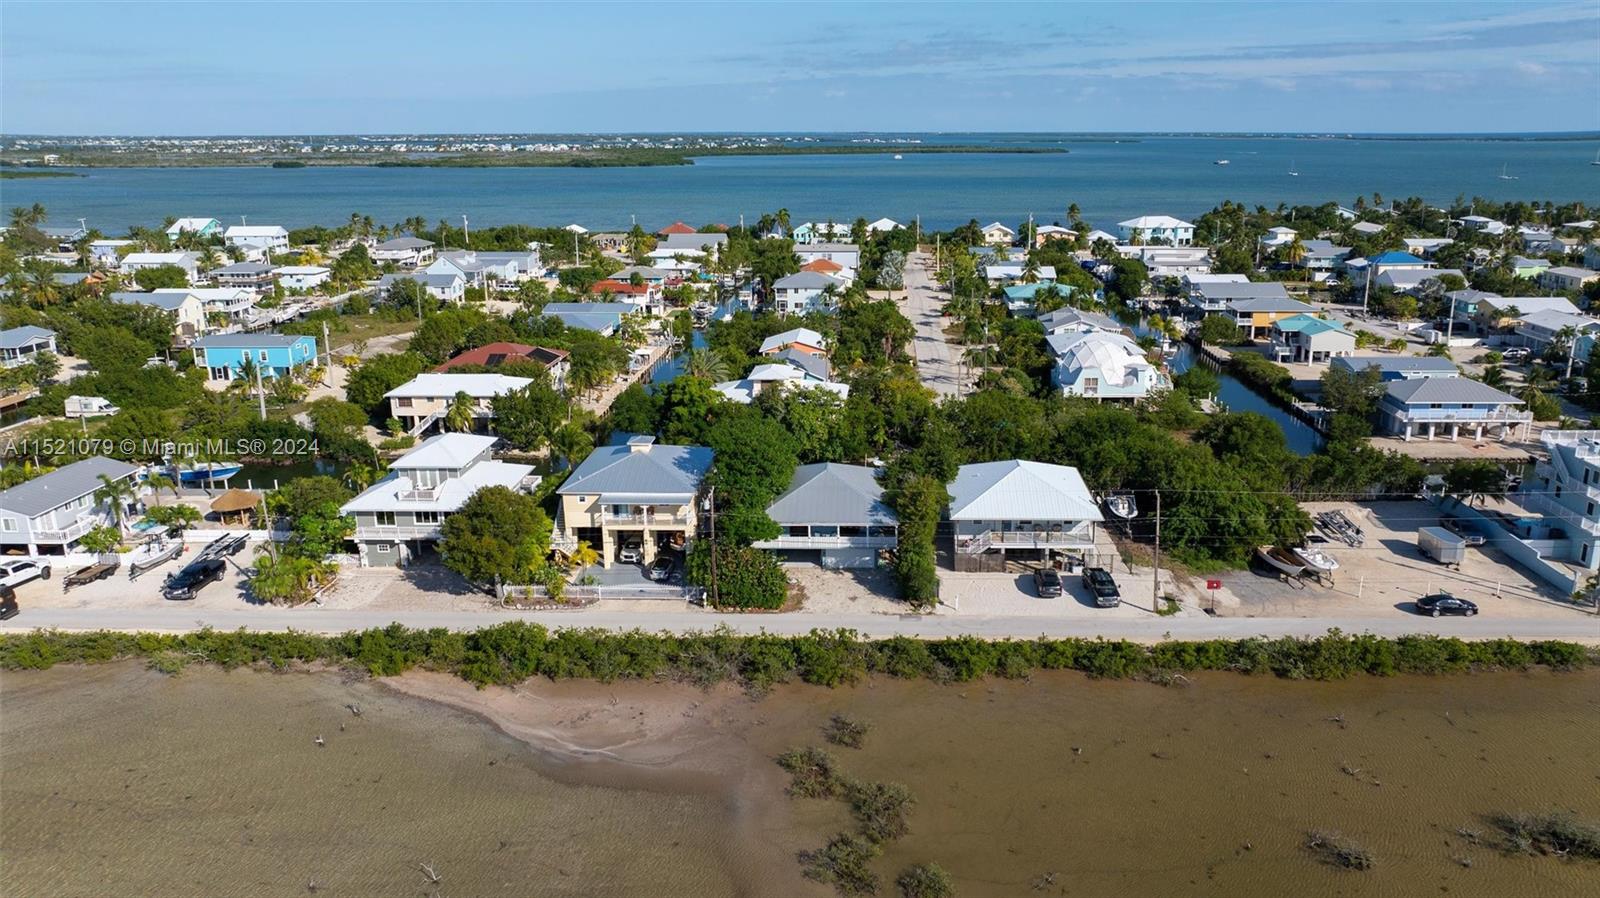 an aerial view of lake residential houses with outdoor space and ocean view